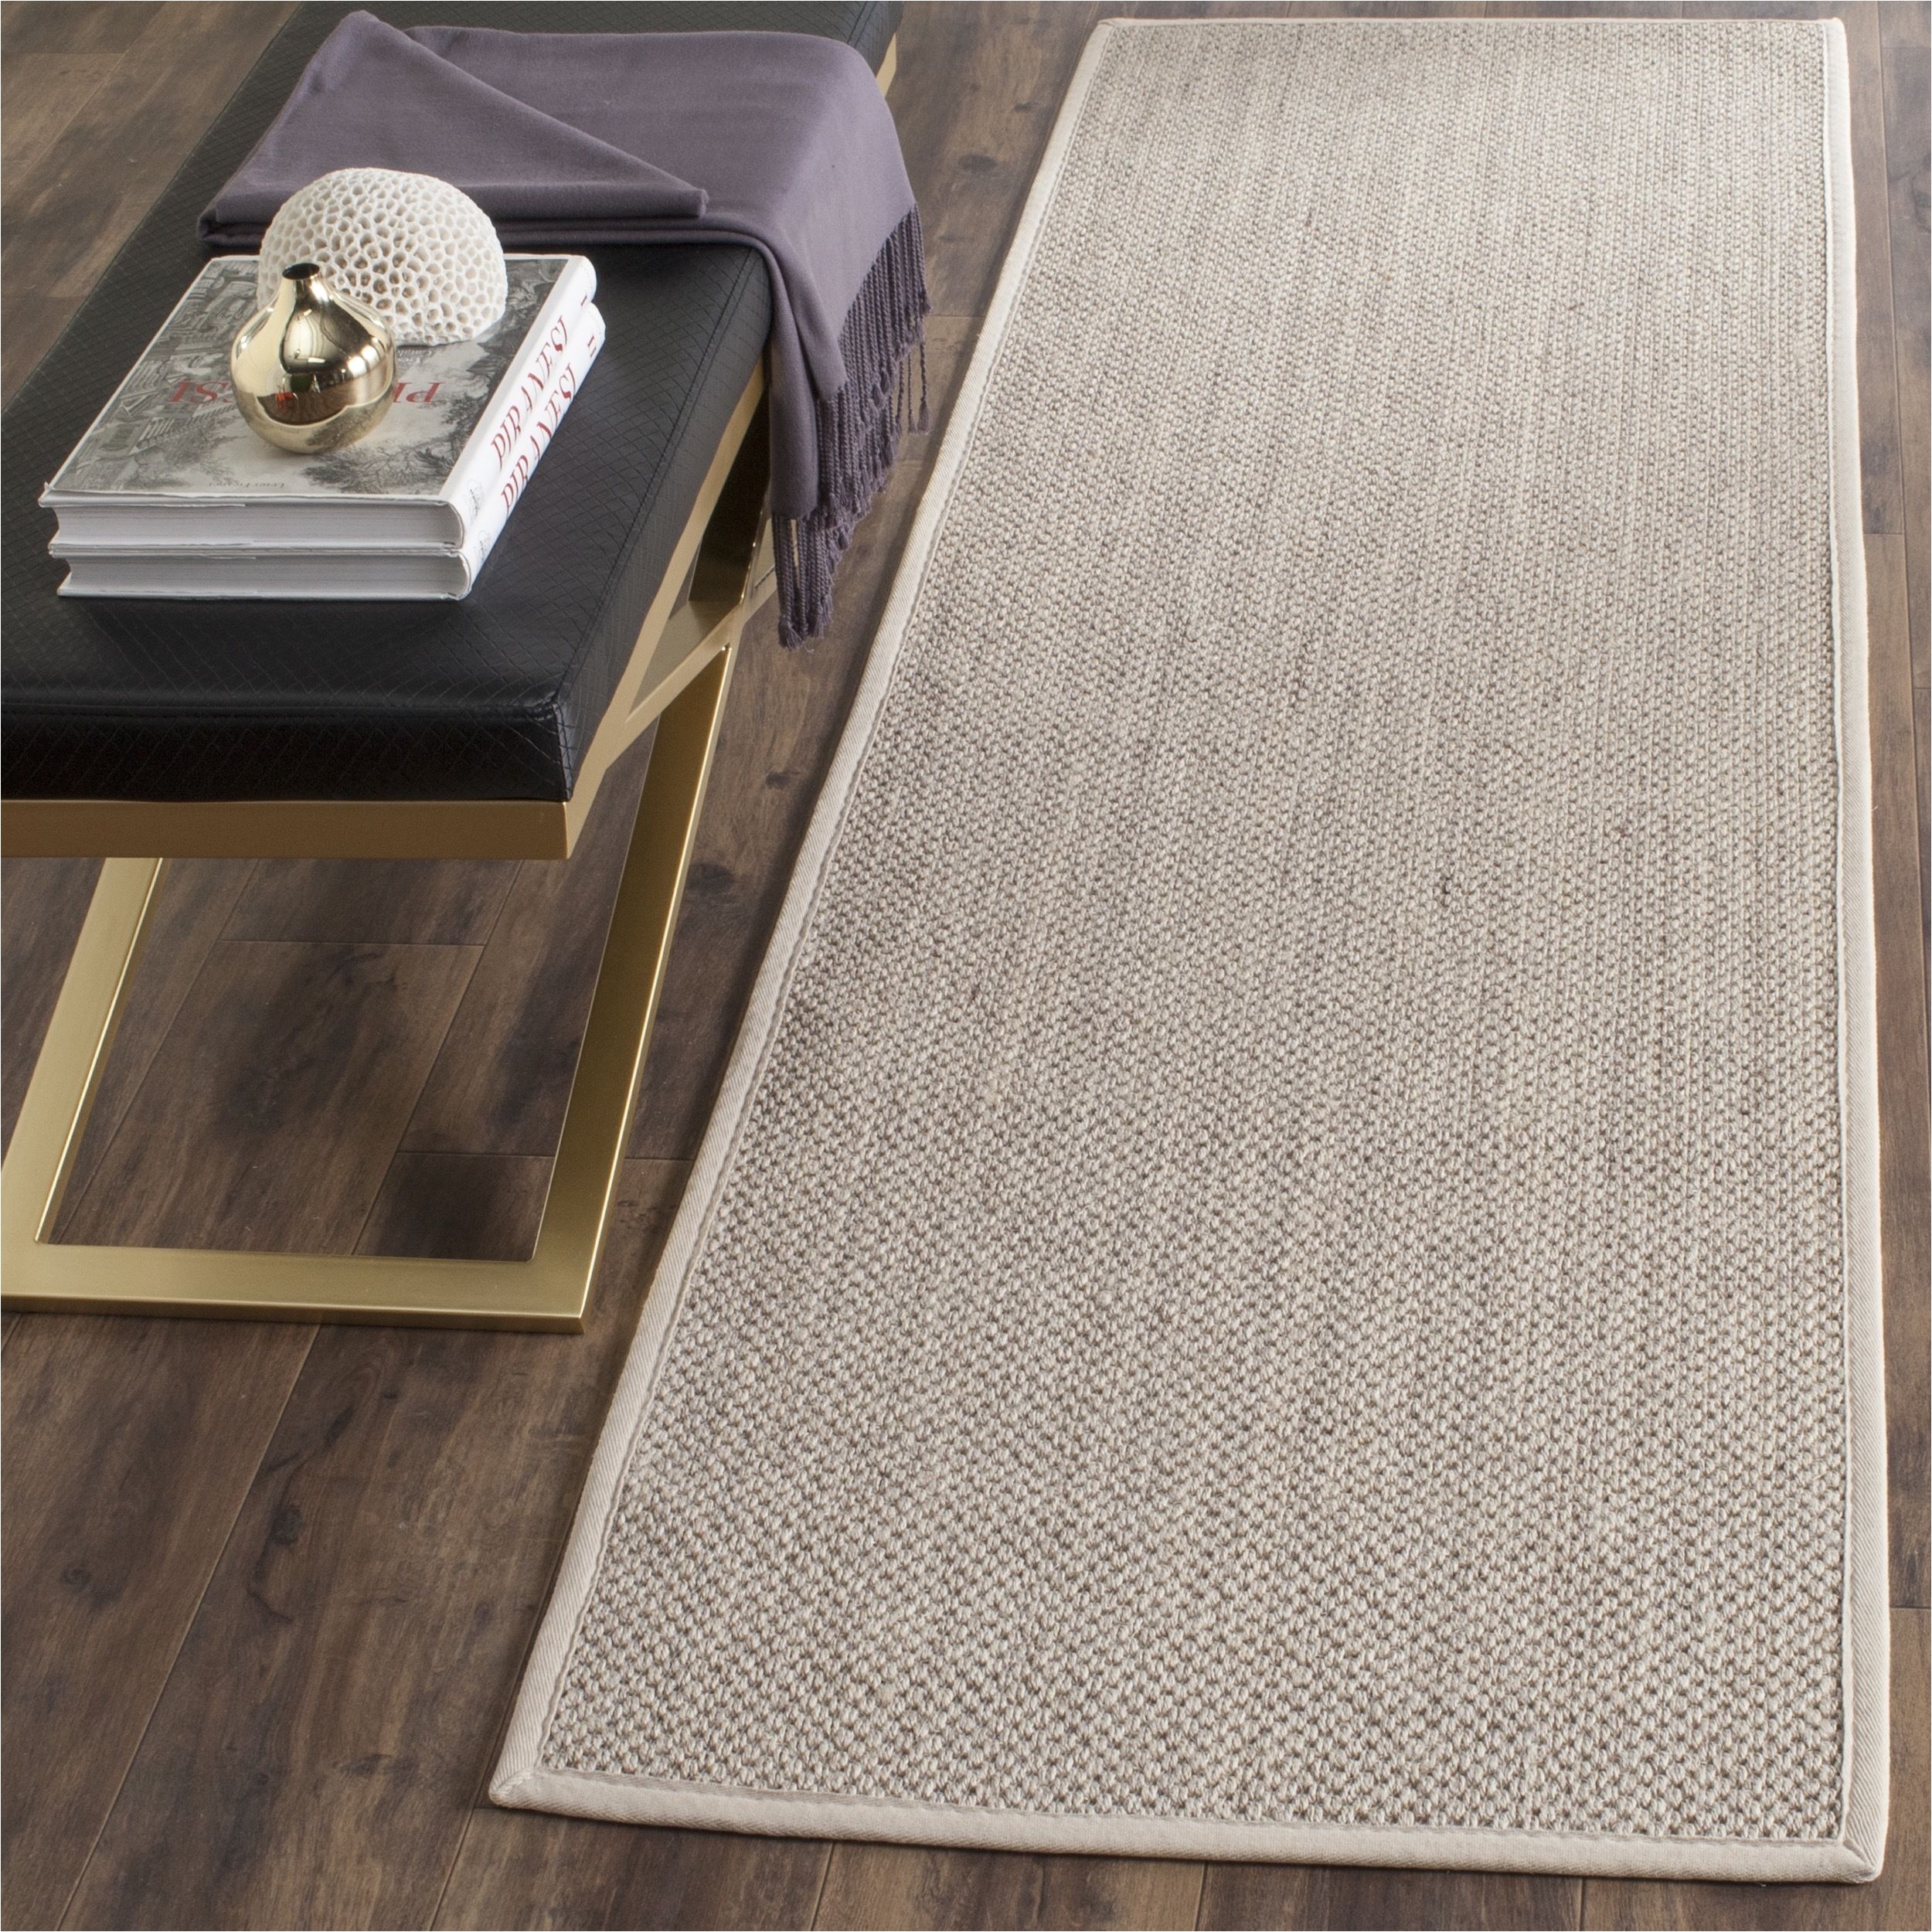 2 X 12 Runner Rugs Safavieh S Natural Fiber Collection is Inspired by Timeless